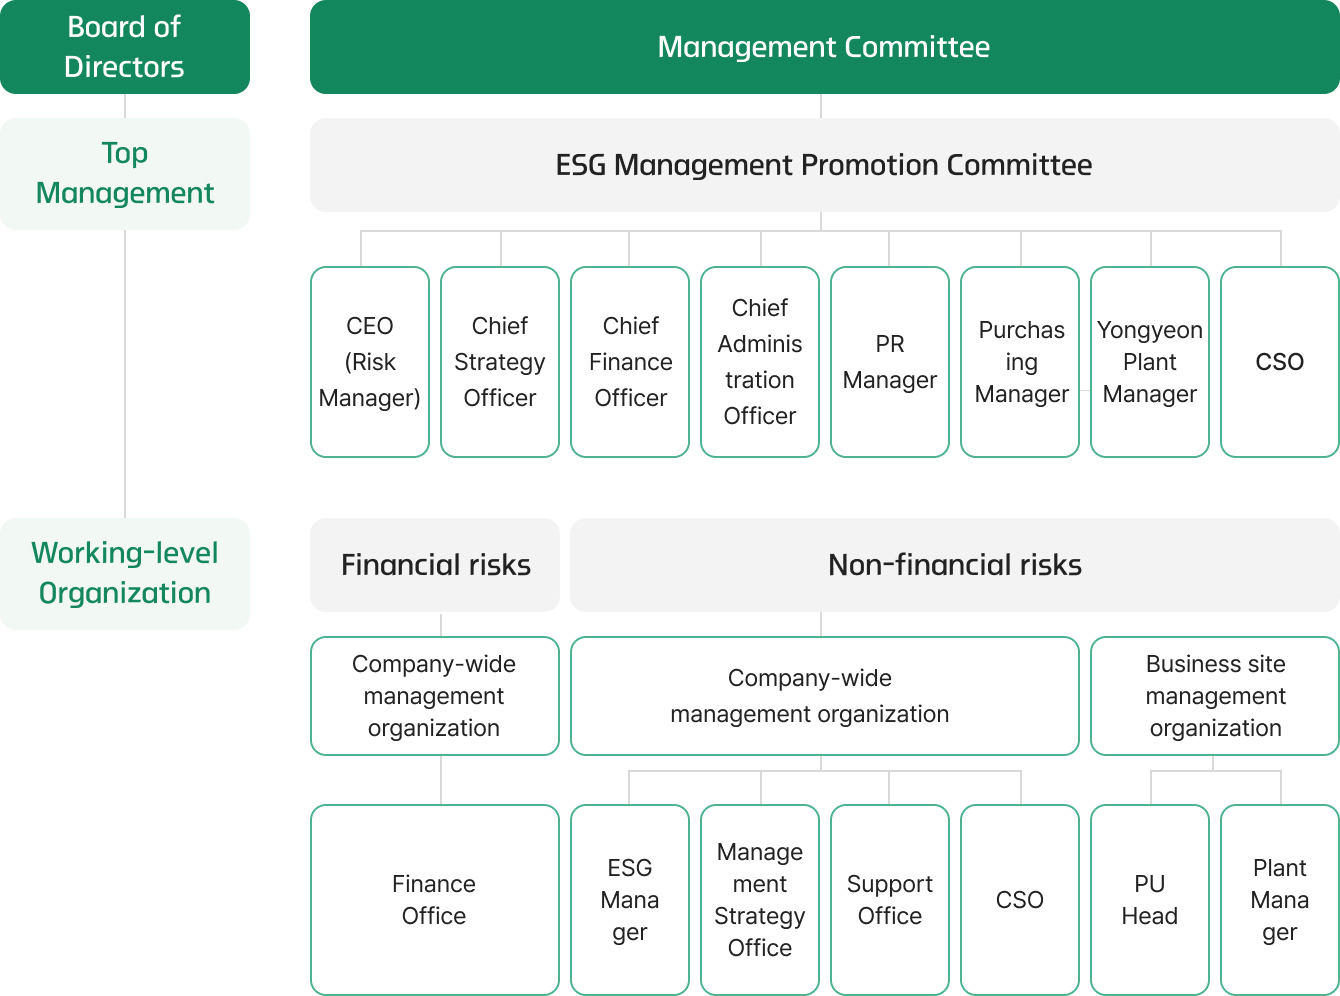 Board of Directors: Management Committee, Top Management: ESG Management Promotion Committee(CEO(Risk Manager), Chief Strategy Officer, Chief Finance Officer, Chief Administration Officer, PR Manager, Purchasing Manager, Yongyeon Plant Manager, CSO), Working-level Organization: 1.Financial risks(Company-wide management organization - Finance Office), 2.Non-financial risks(Company-wide management organization - ESG Manager, Management Strategy Office, Support Office, CSO / Business site management organization - PU Head, Plant Manager)